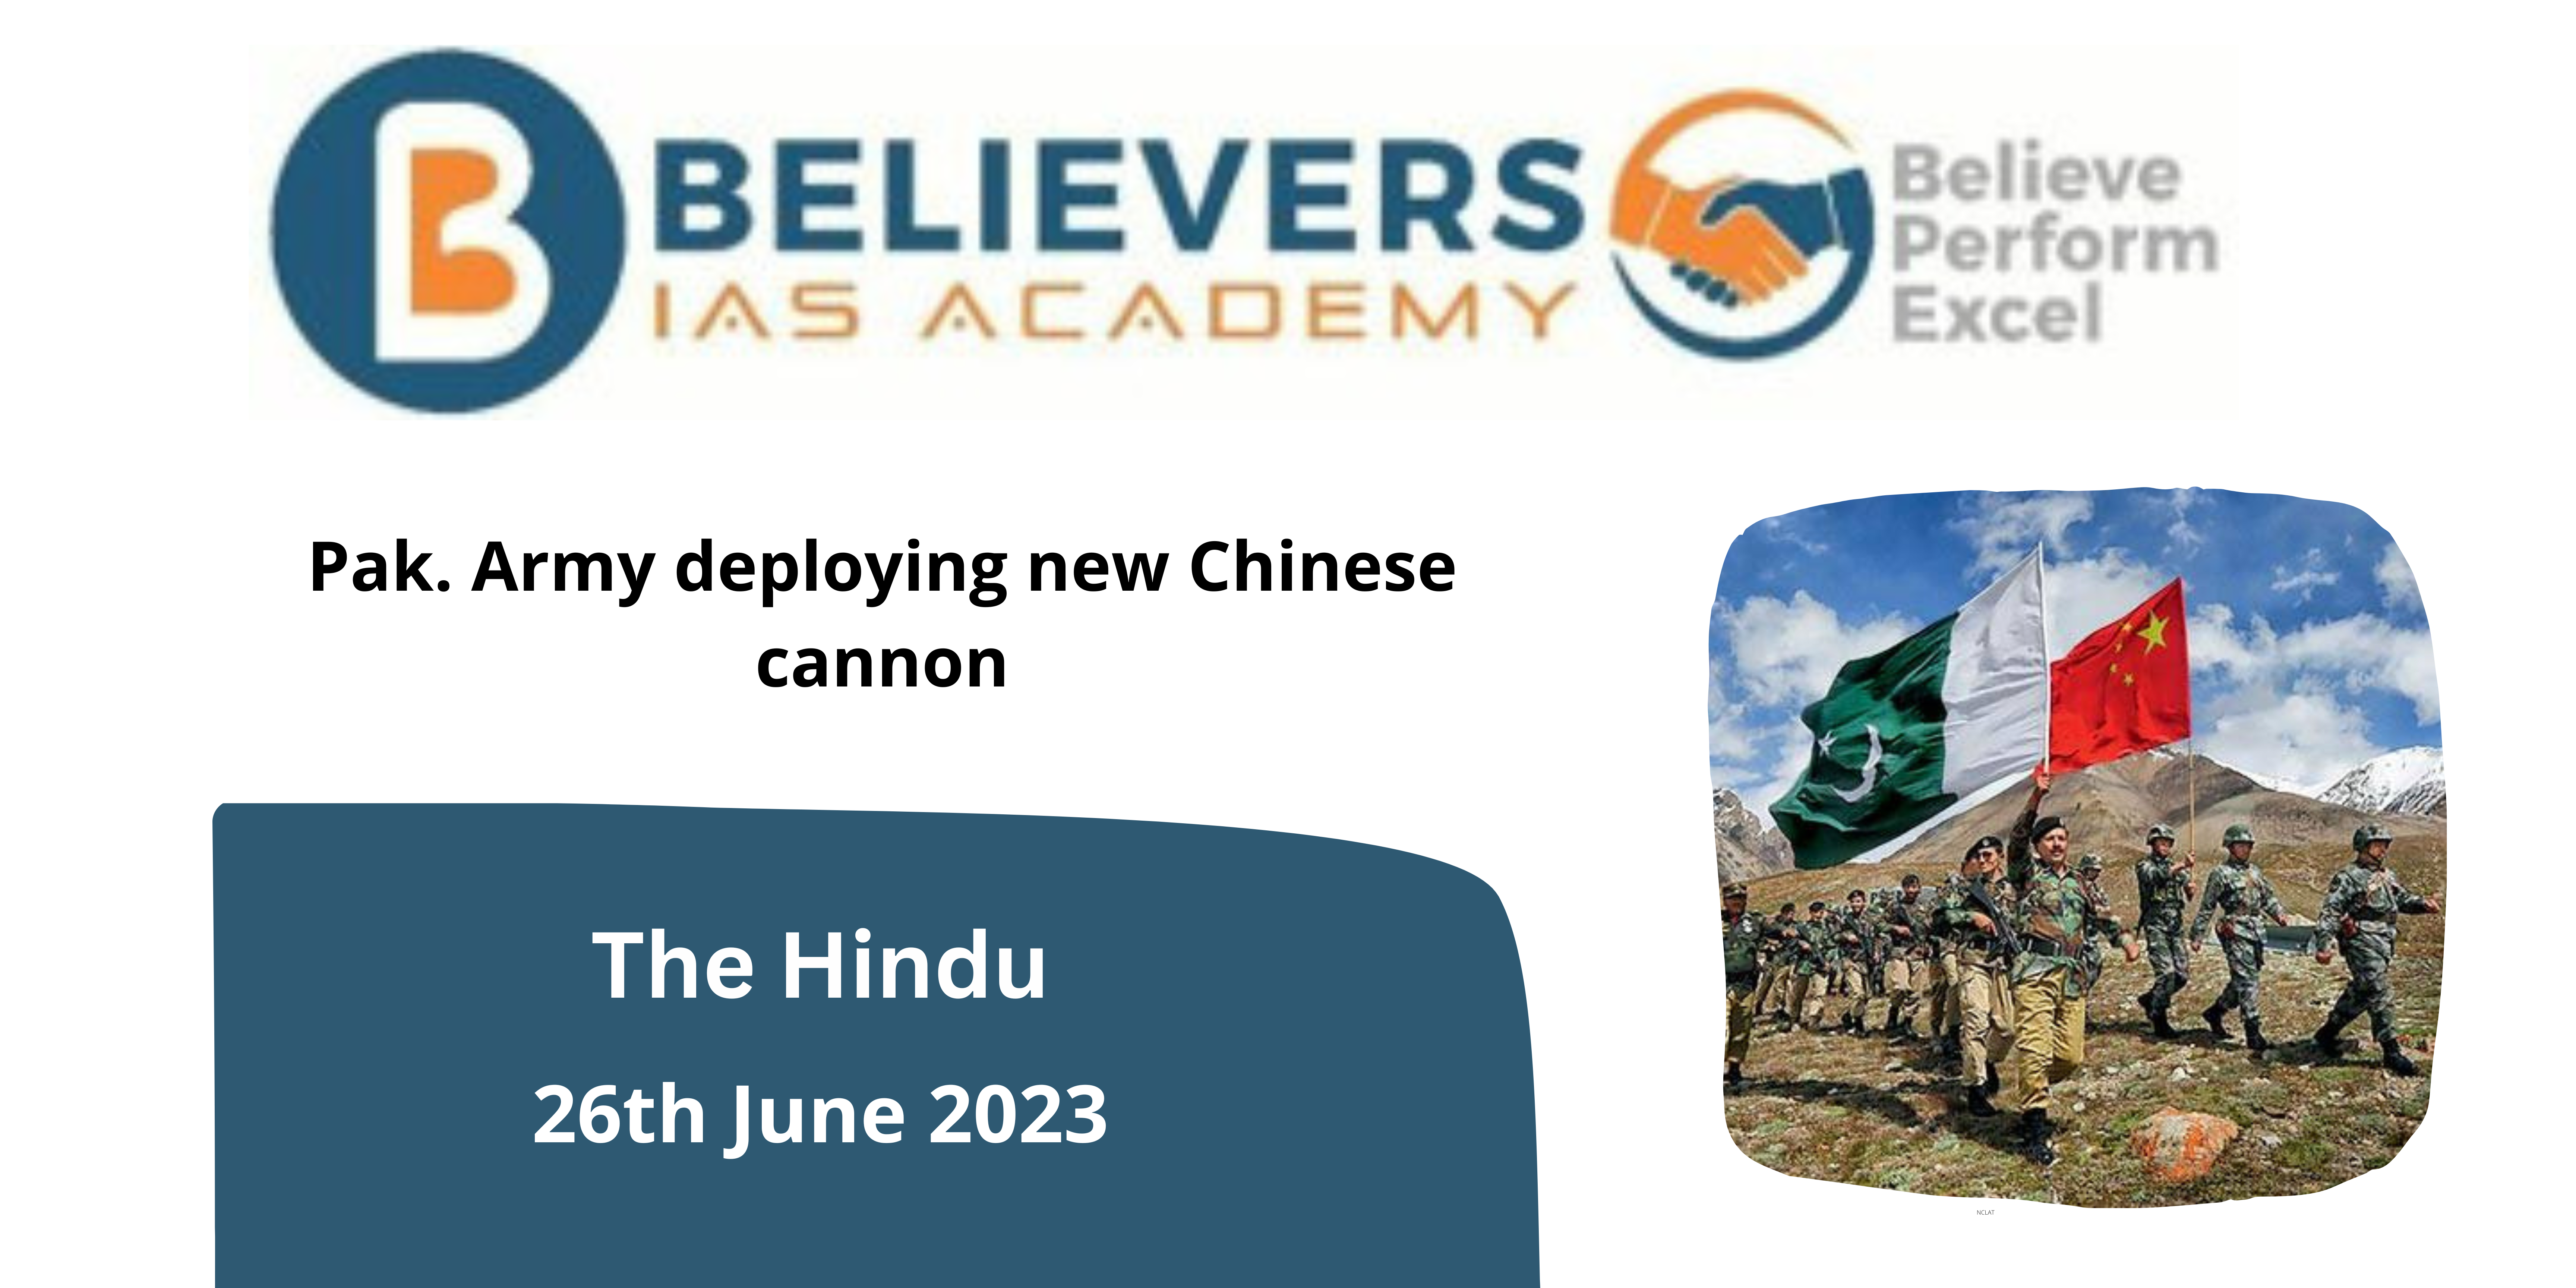 Pak. Army deploying new Chinese cannon